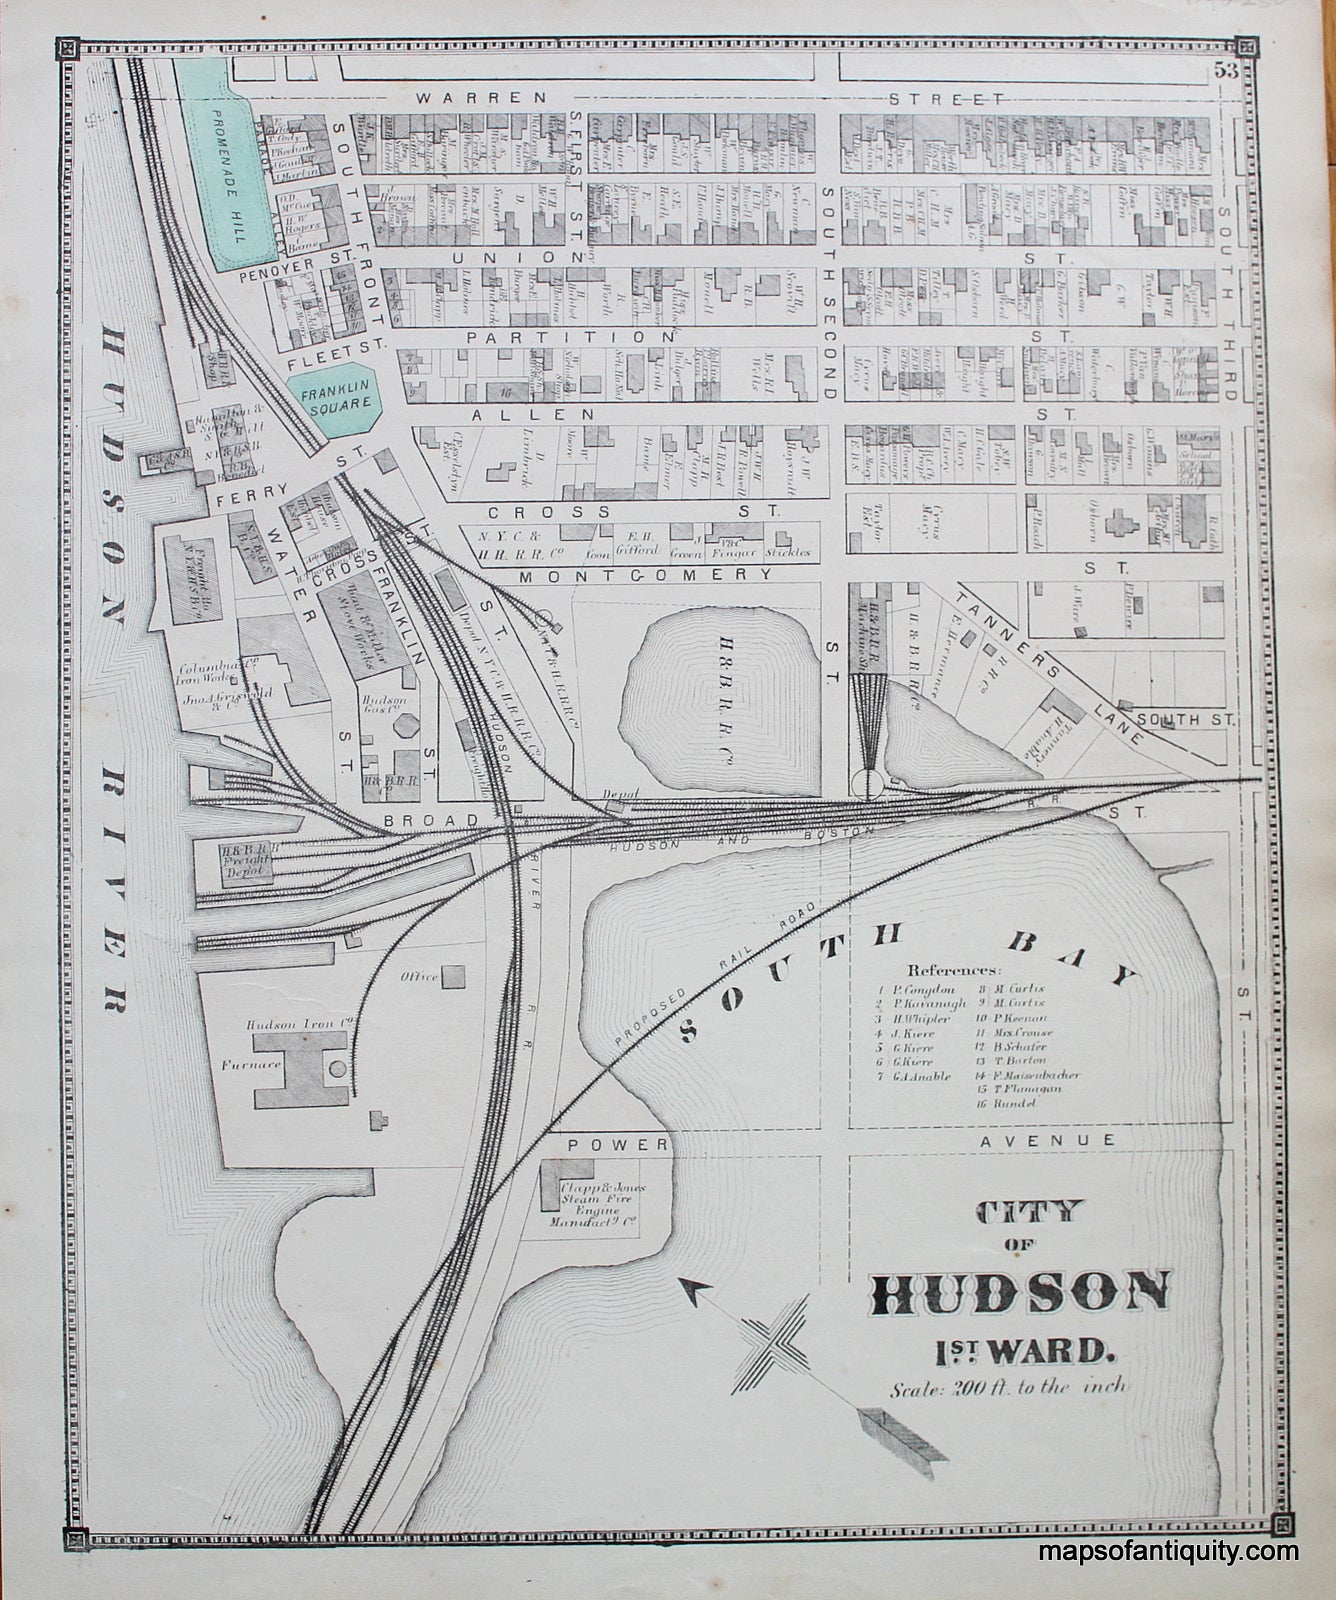 Antique-Hand-Colored-Map-City-of-Hudson-1st-Ward-(NY)-United-States-Northeast-1873-Beers-Maps-Of-Antiquity